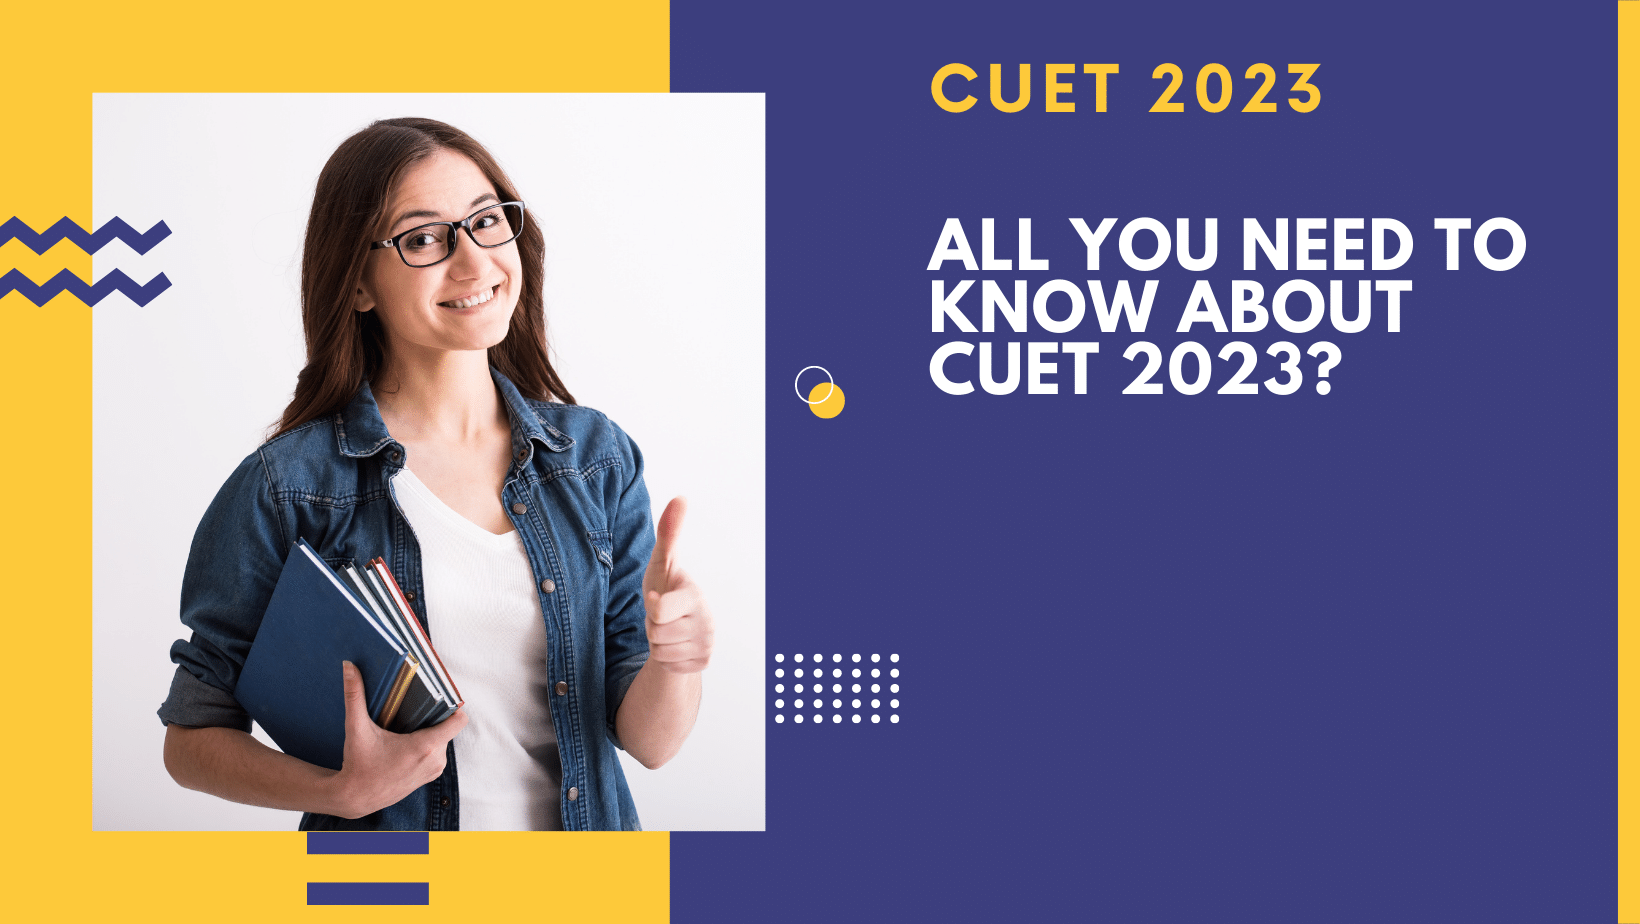 Cover Image of What is CUET and how to prepare for CUET 2023?